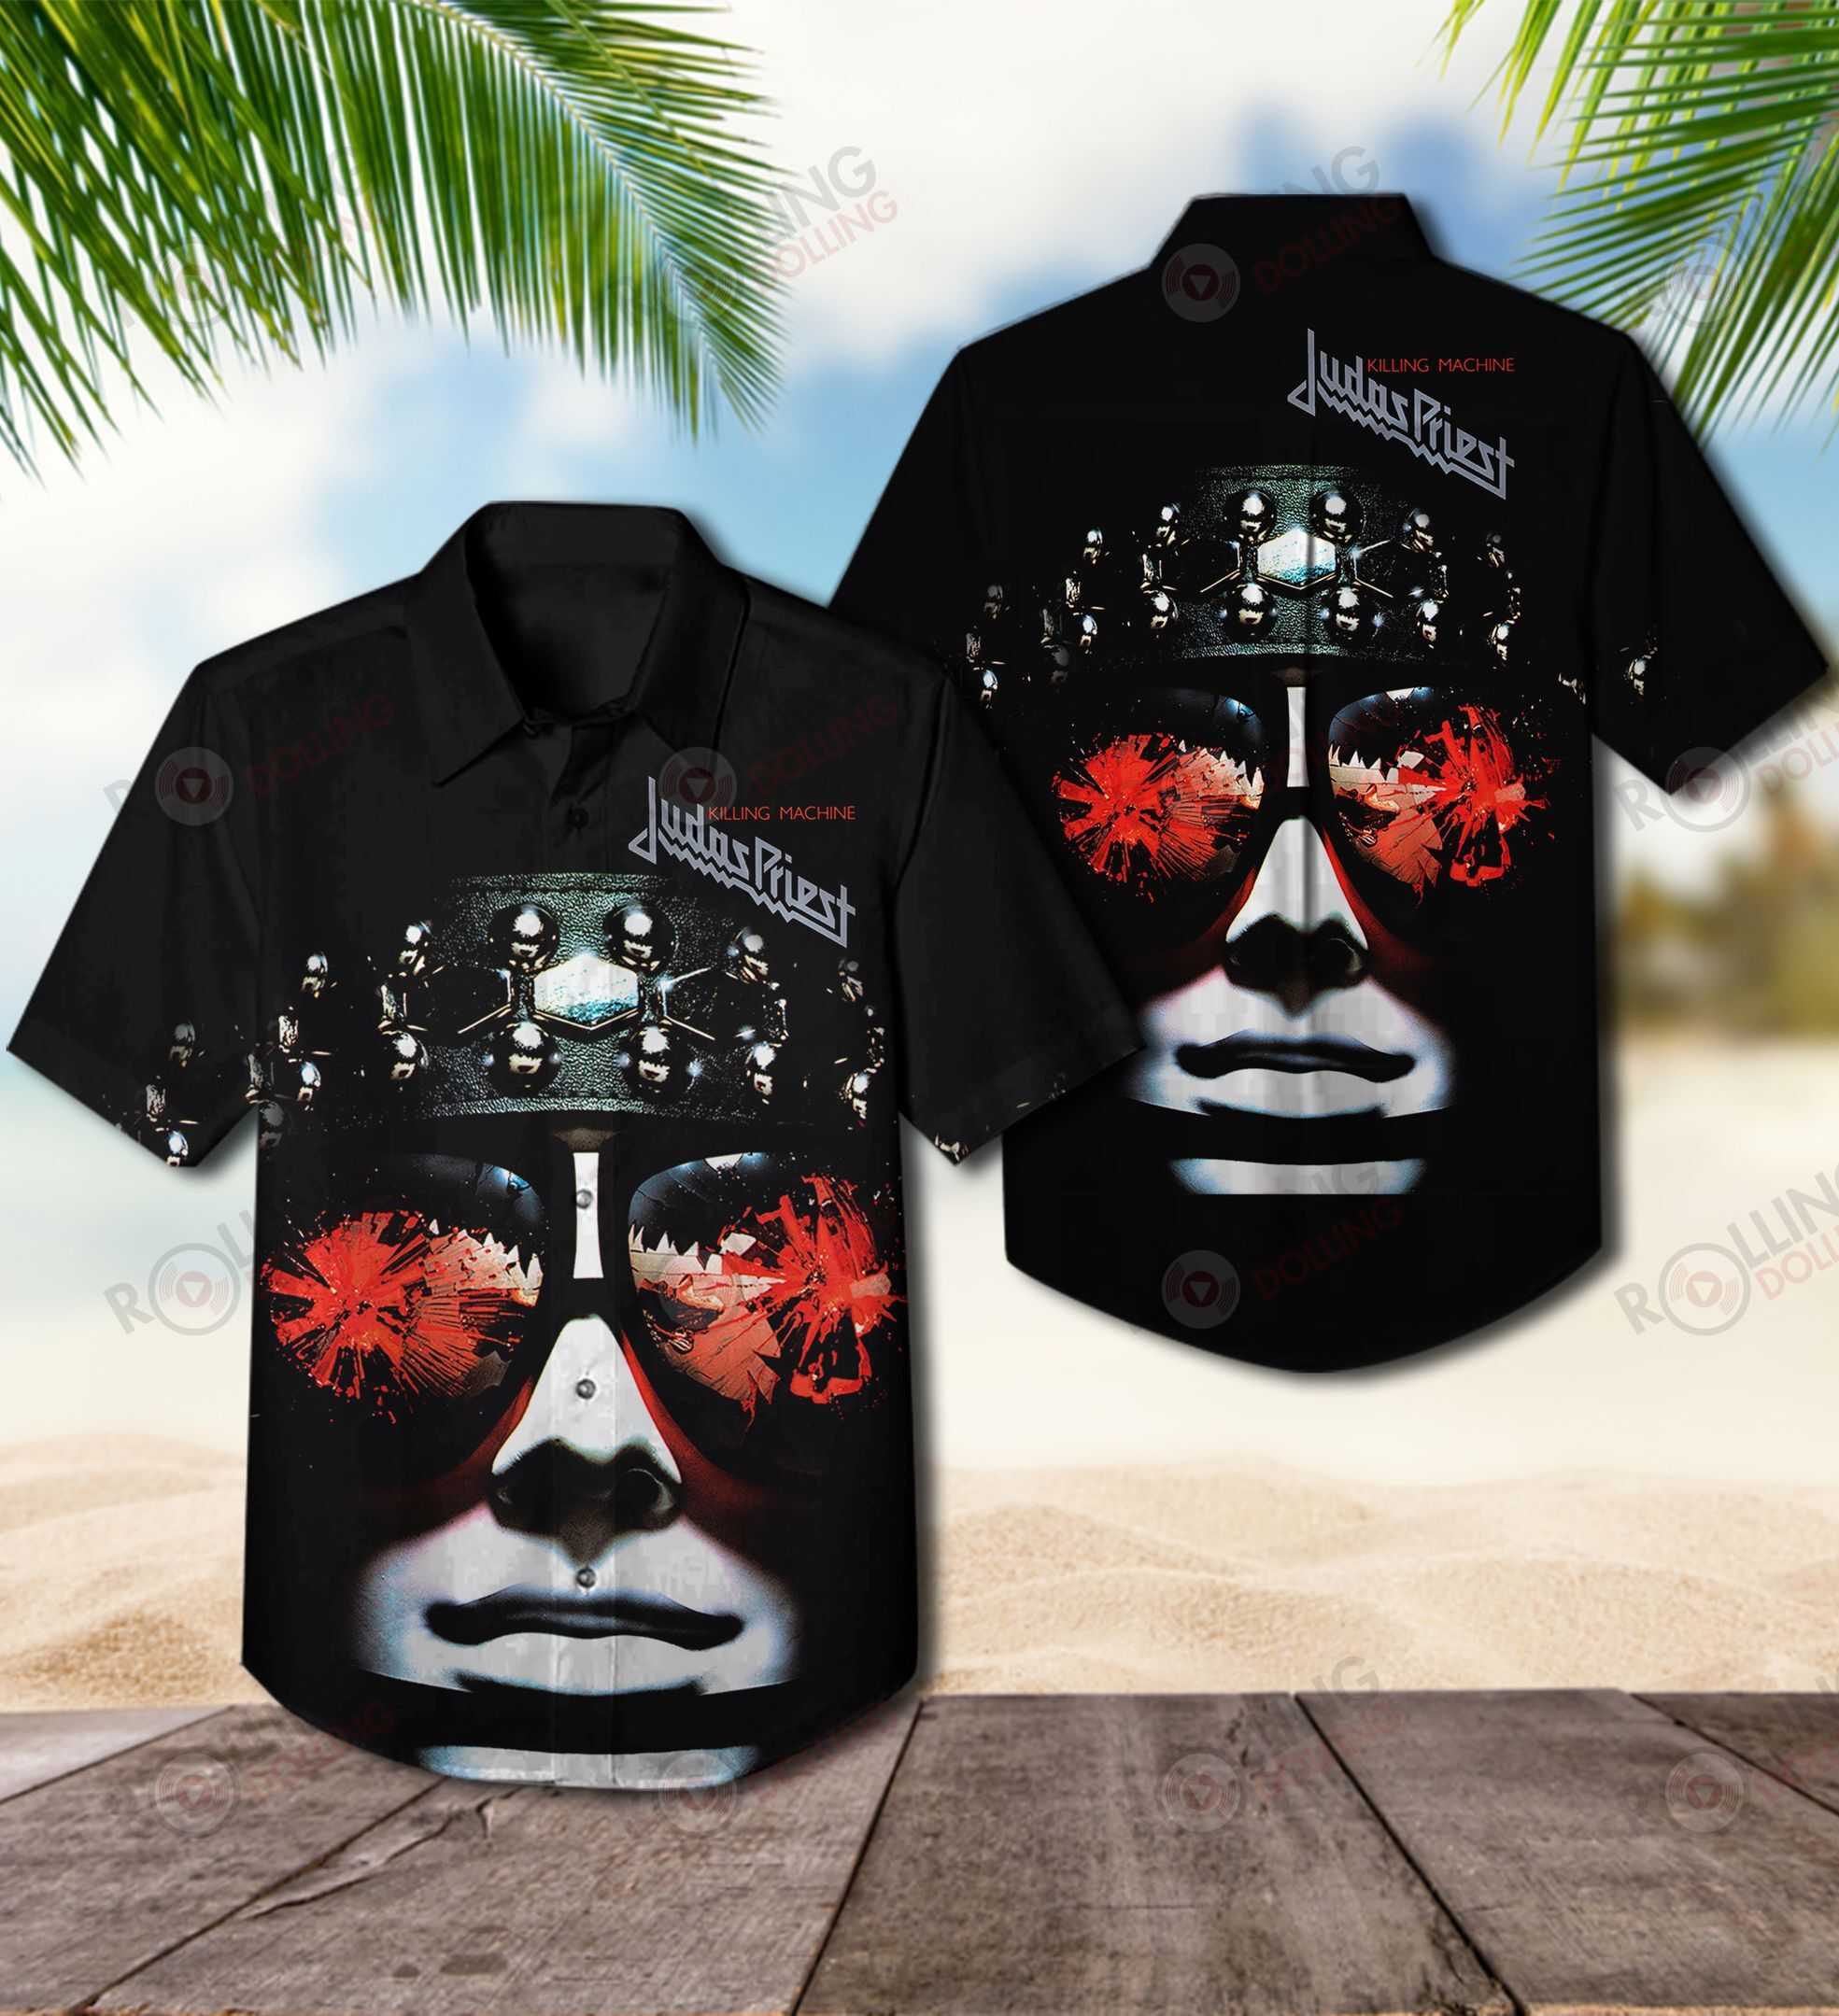 This would make a great gift for any fan who loves Hawaiian Shirt as well as Rock band 108